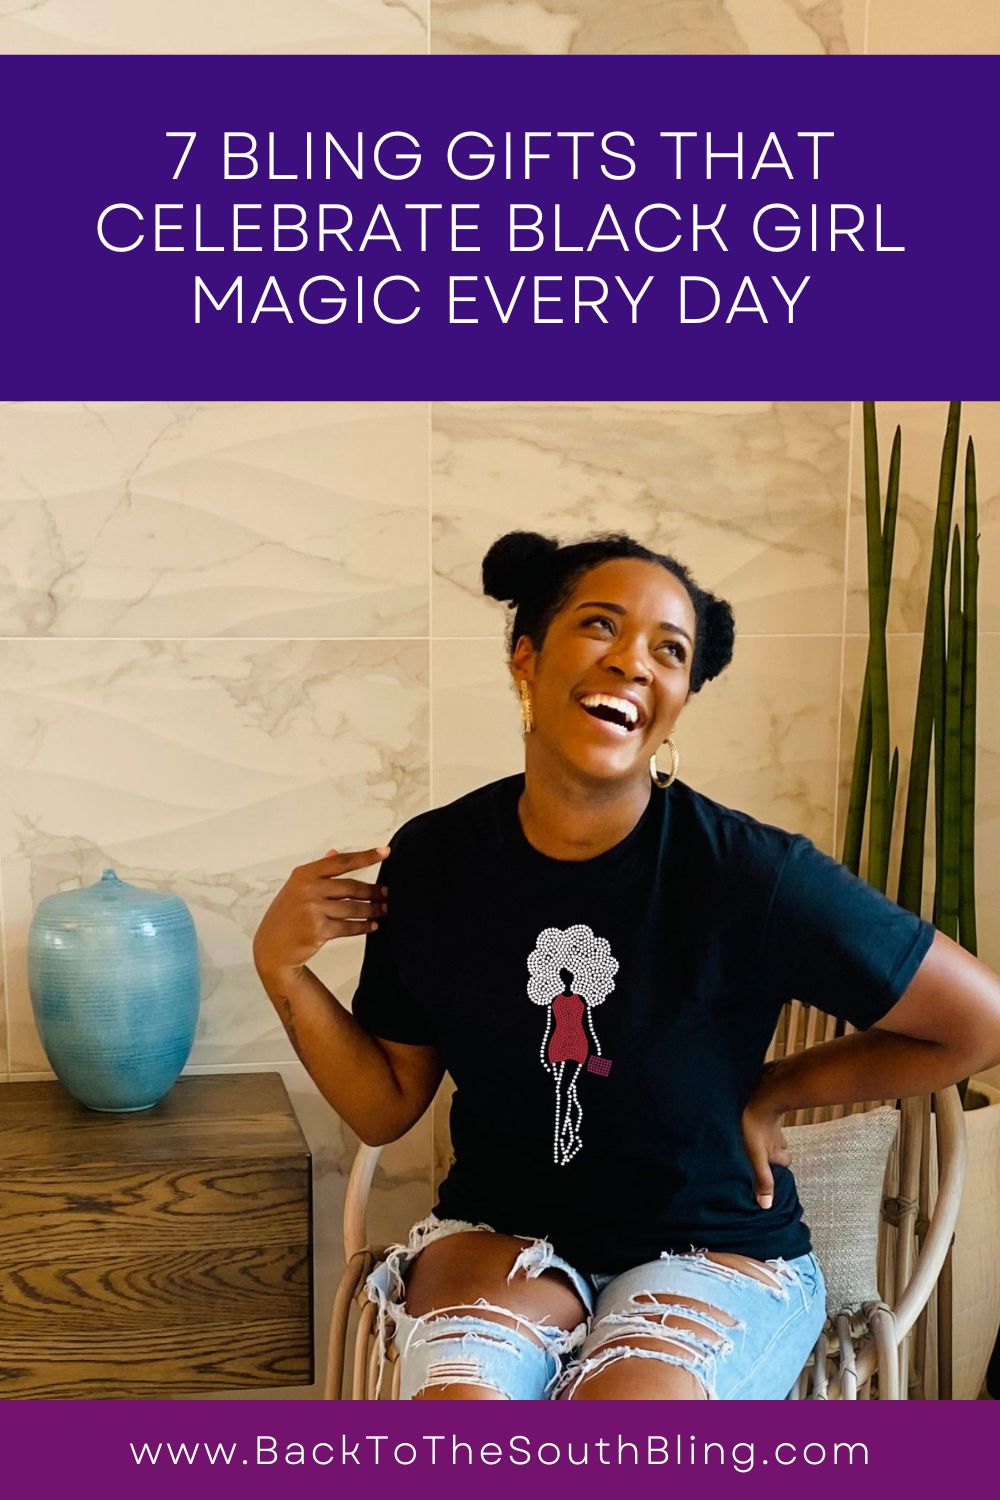 7 Bling Gifts That Celebrate Black Girl Magic Every Day